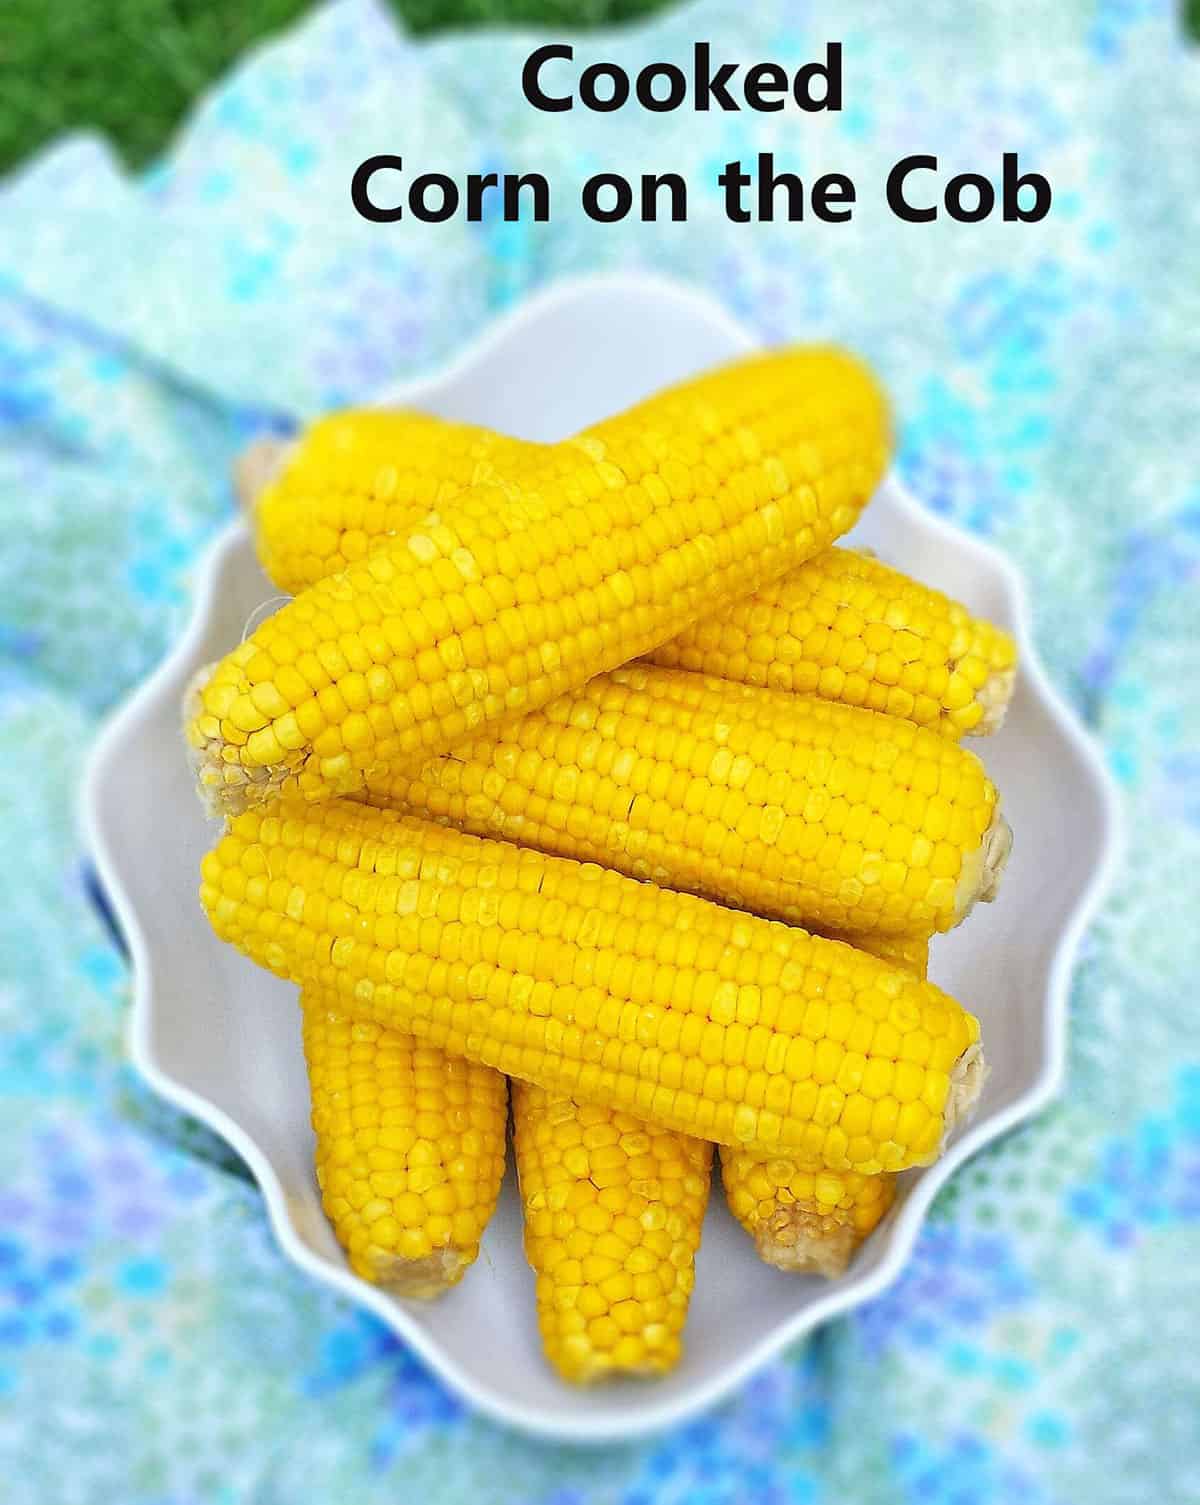 Corn on the cob is easy and quick to prepare, making it a perfect dish for summer barbecues, picnics, and outdoor gatherings.